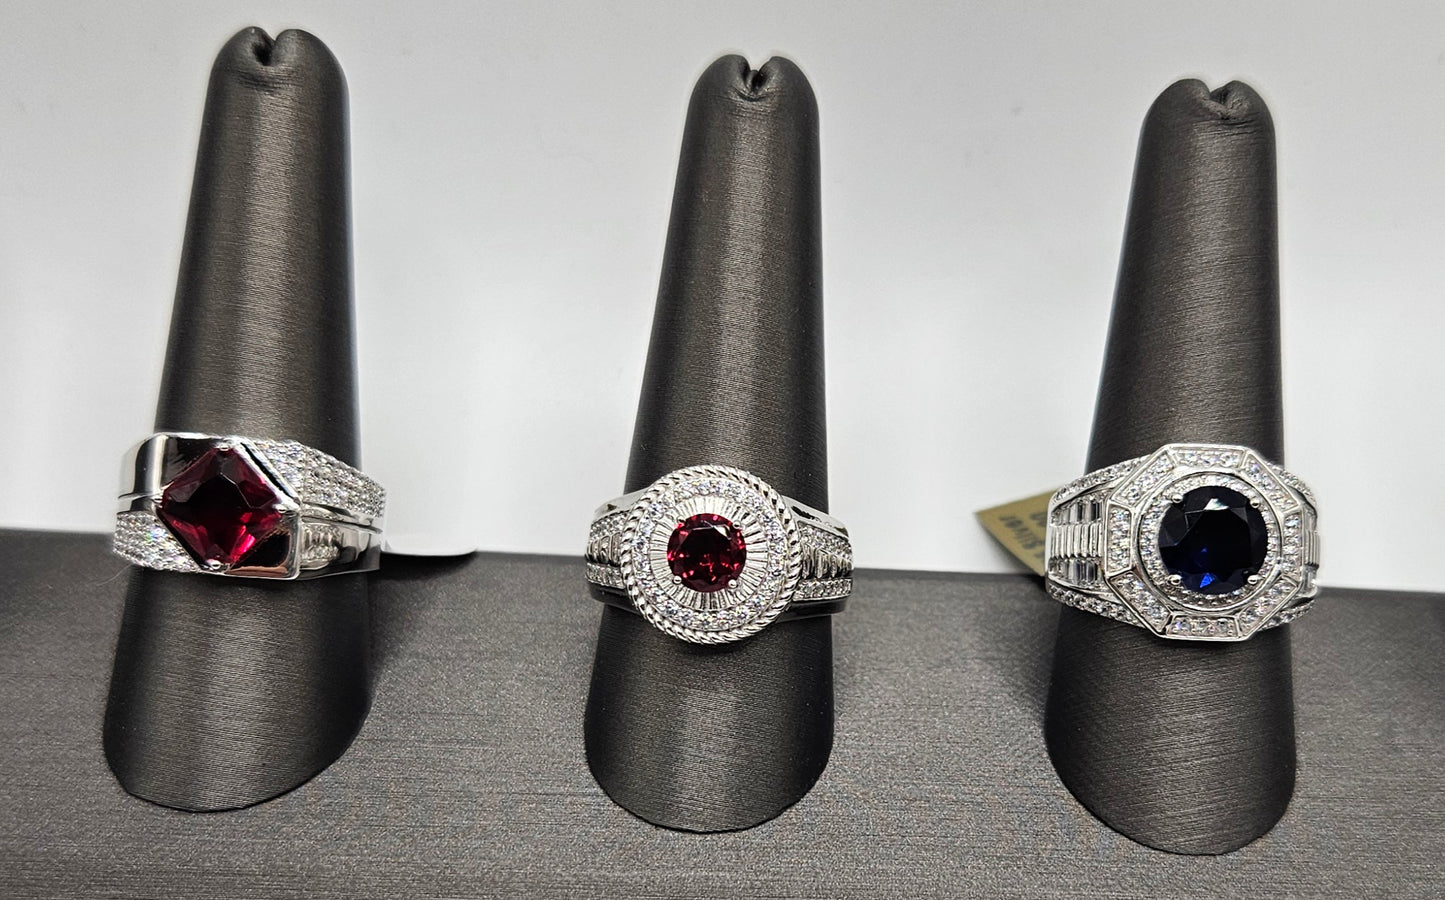 Men Ring with White and Round Red Cubic Zirconia